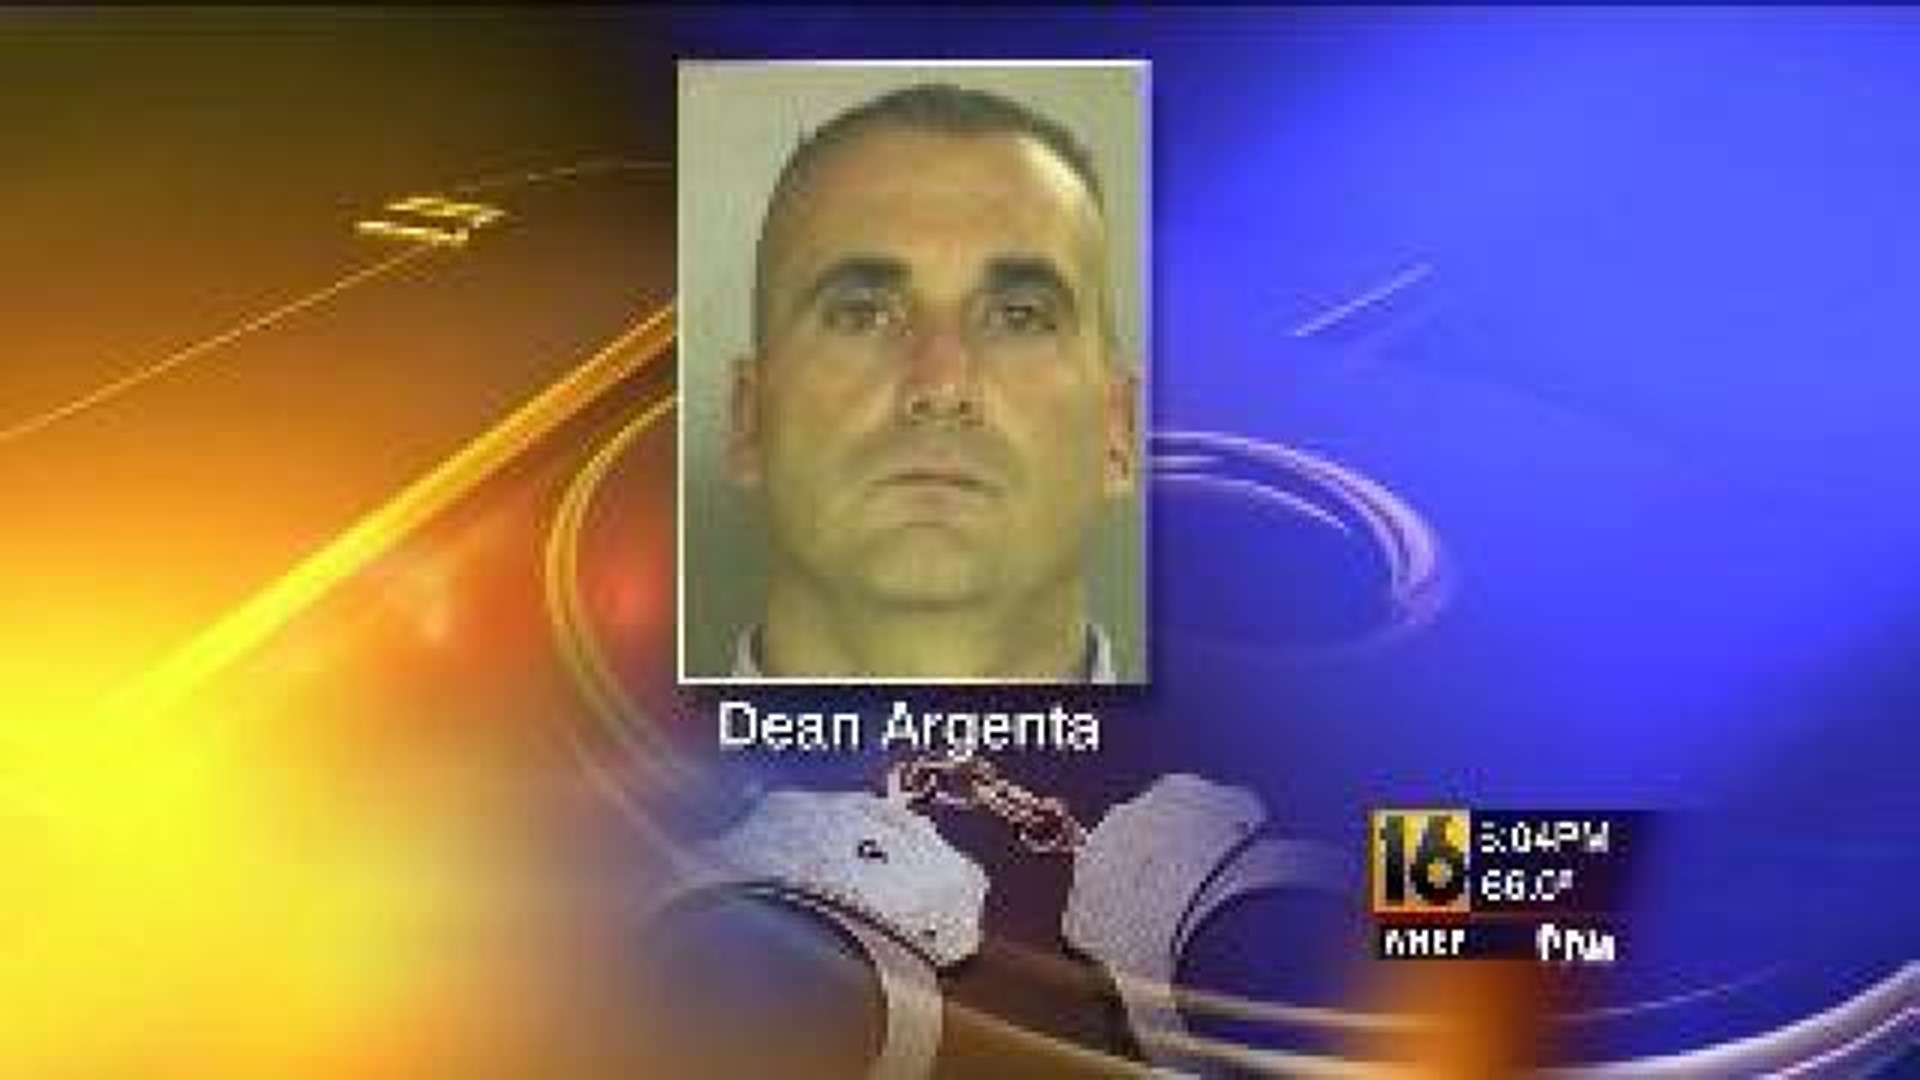 Police: Man Lied on Officer Application